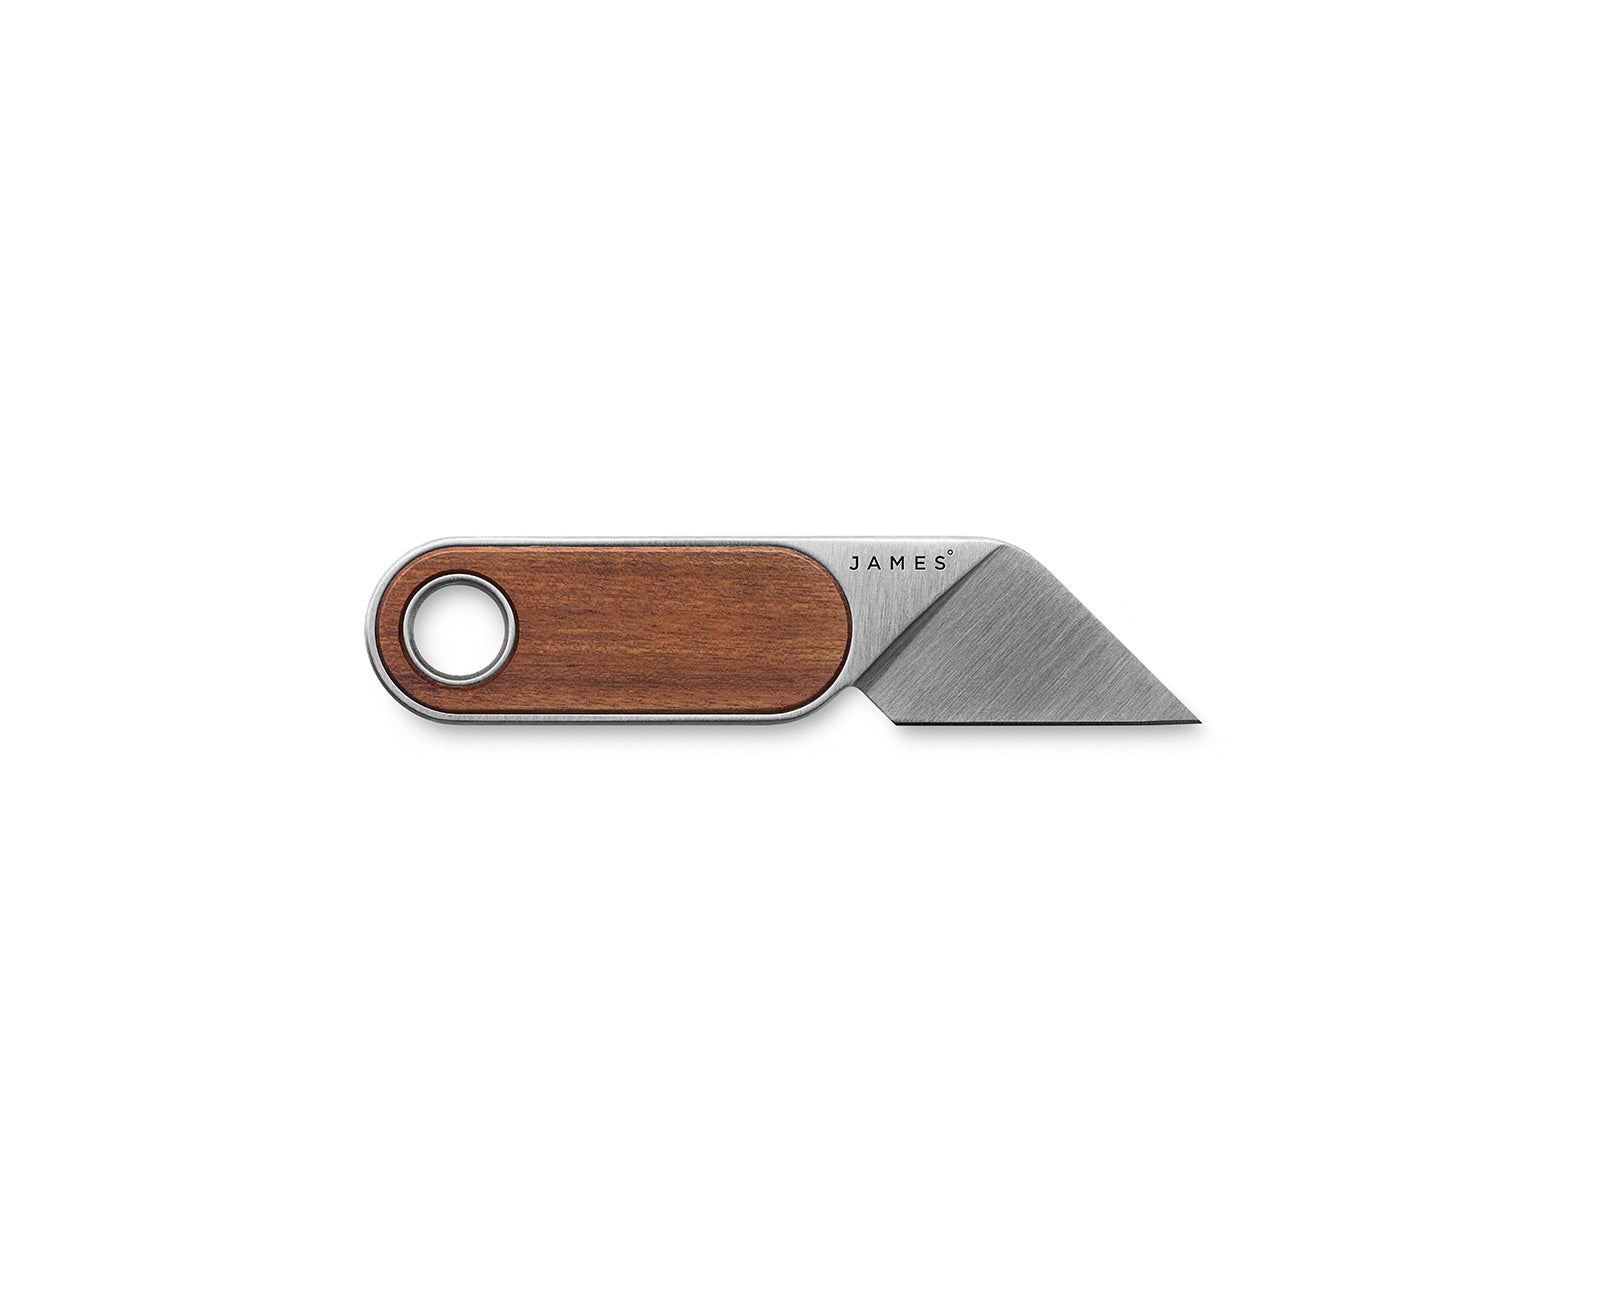 The Abbey knife with rosewood handle and stainless steel blade.